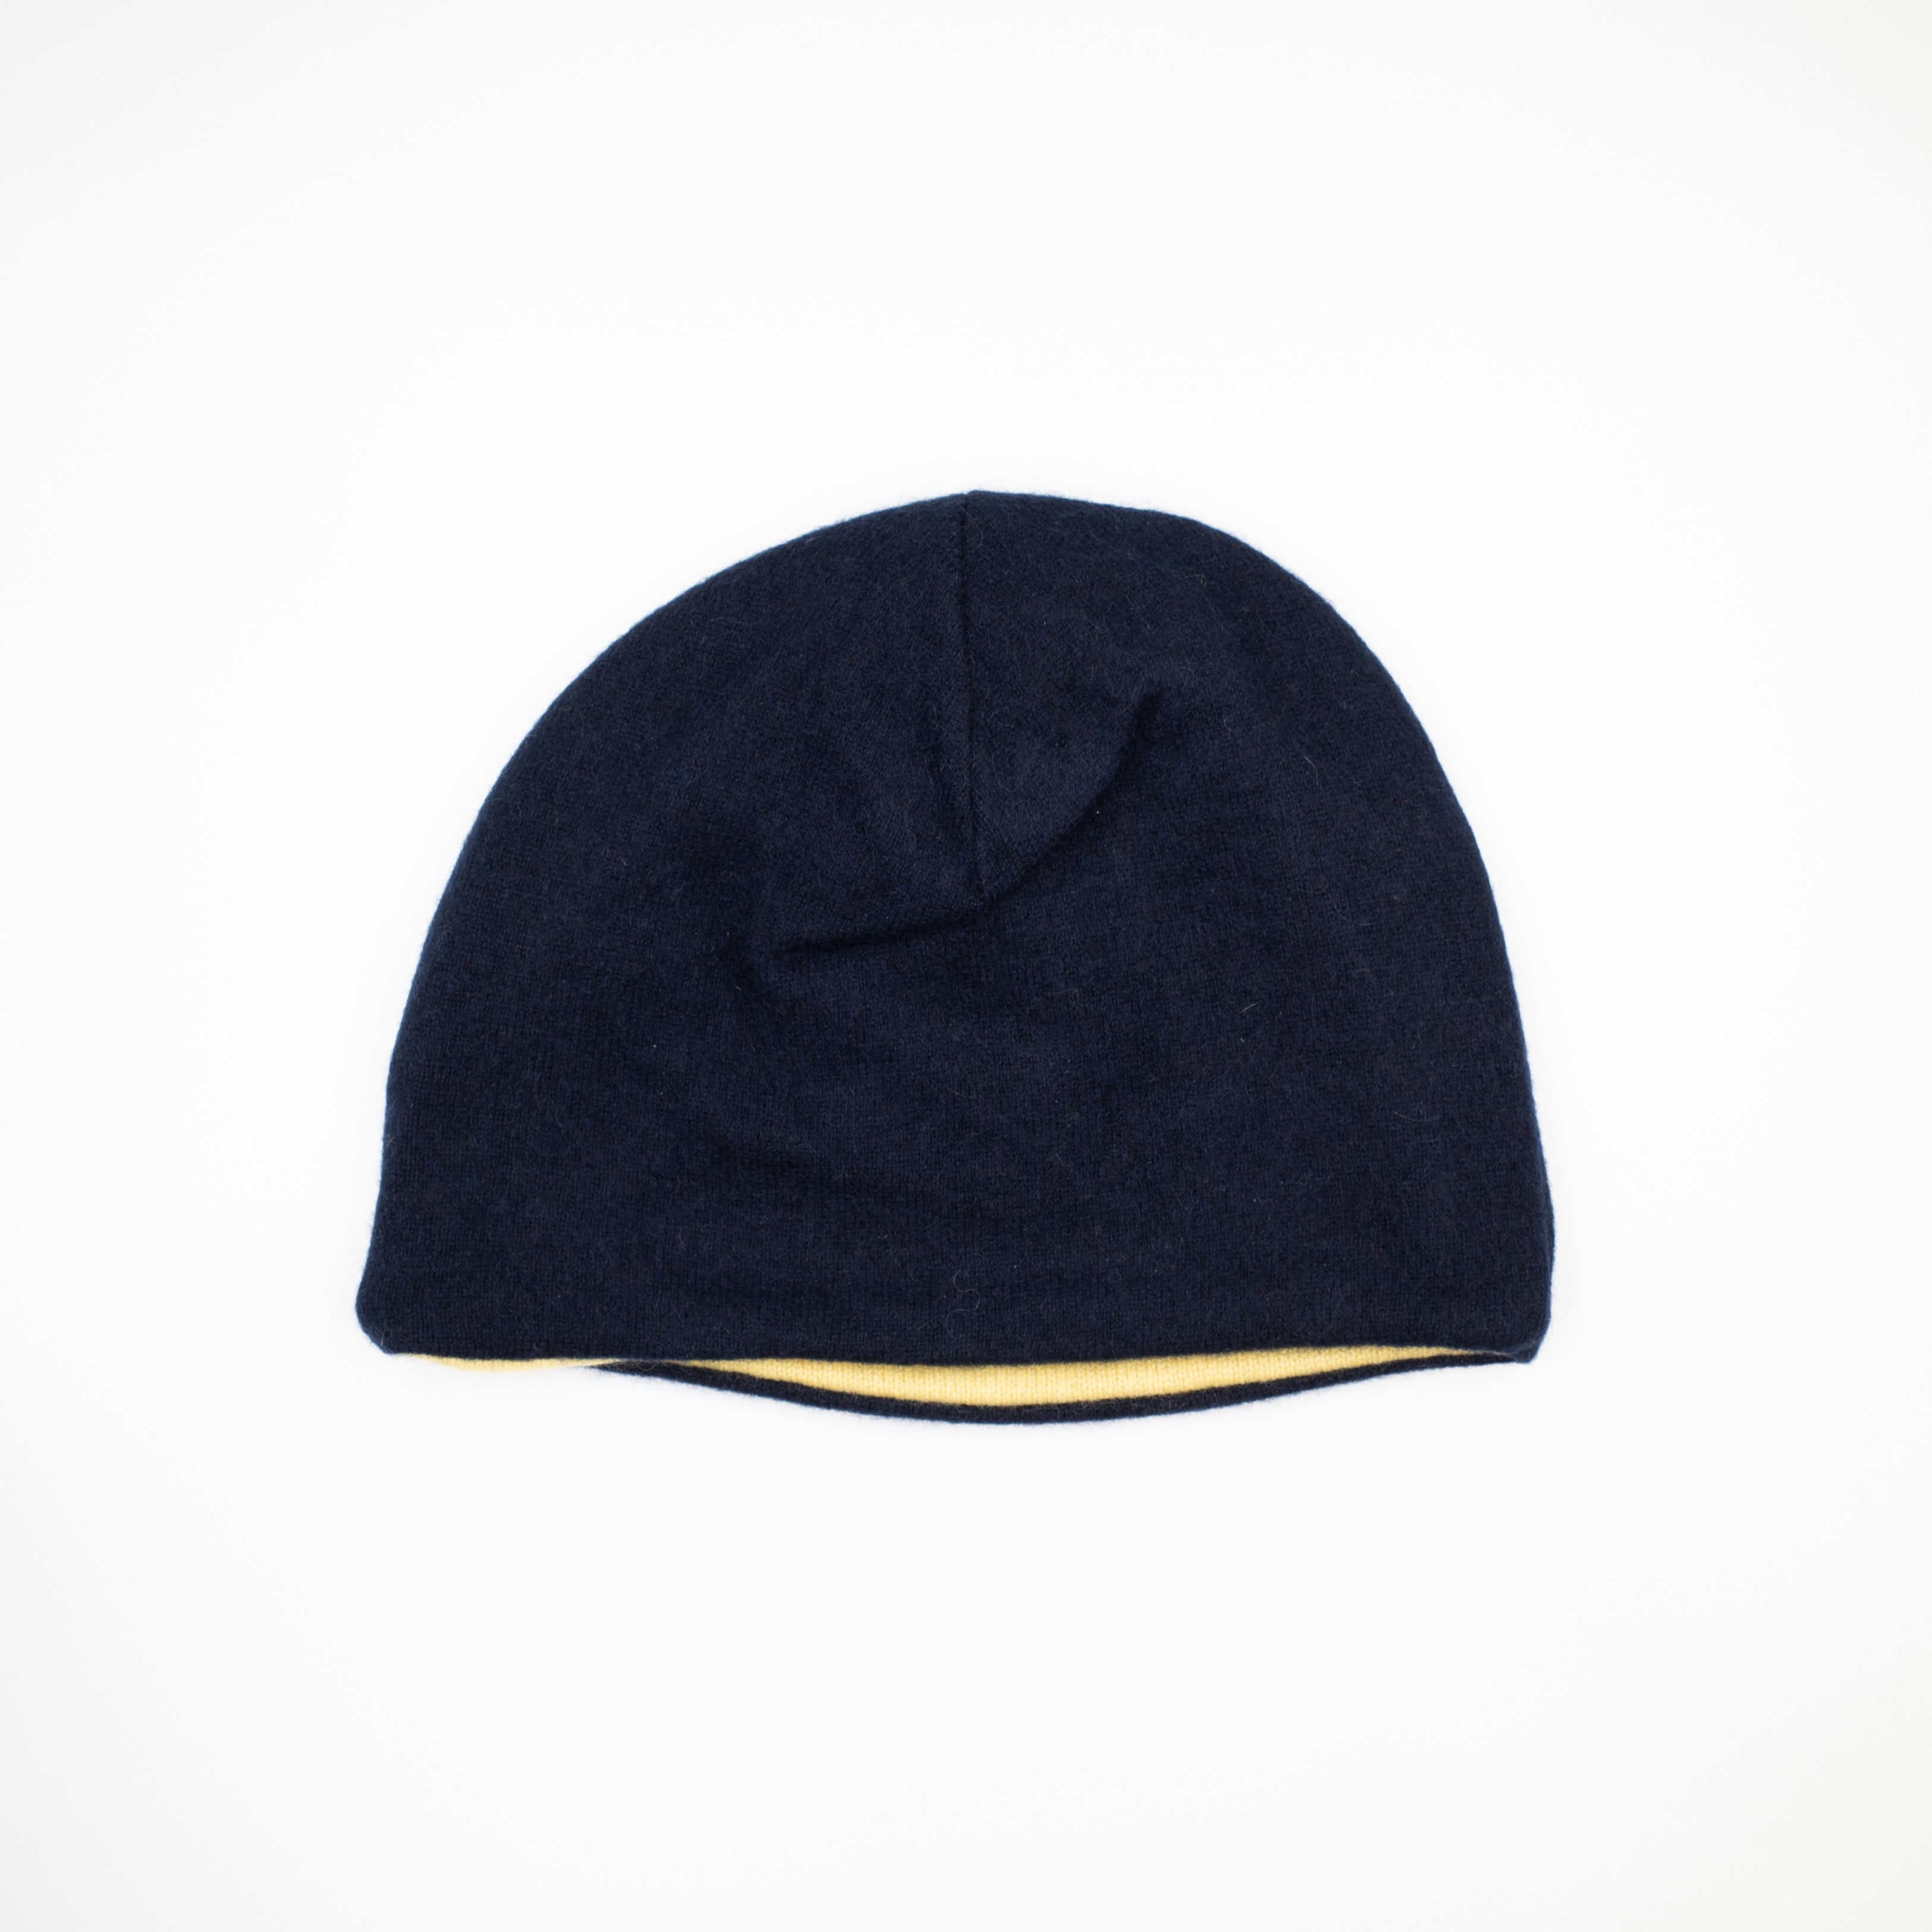 Navy and Yellow Cashmere Beanie Hat